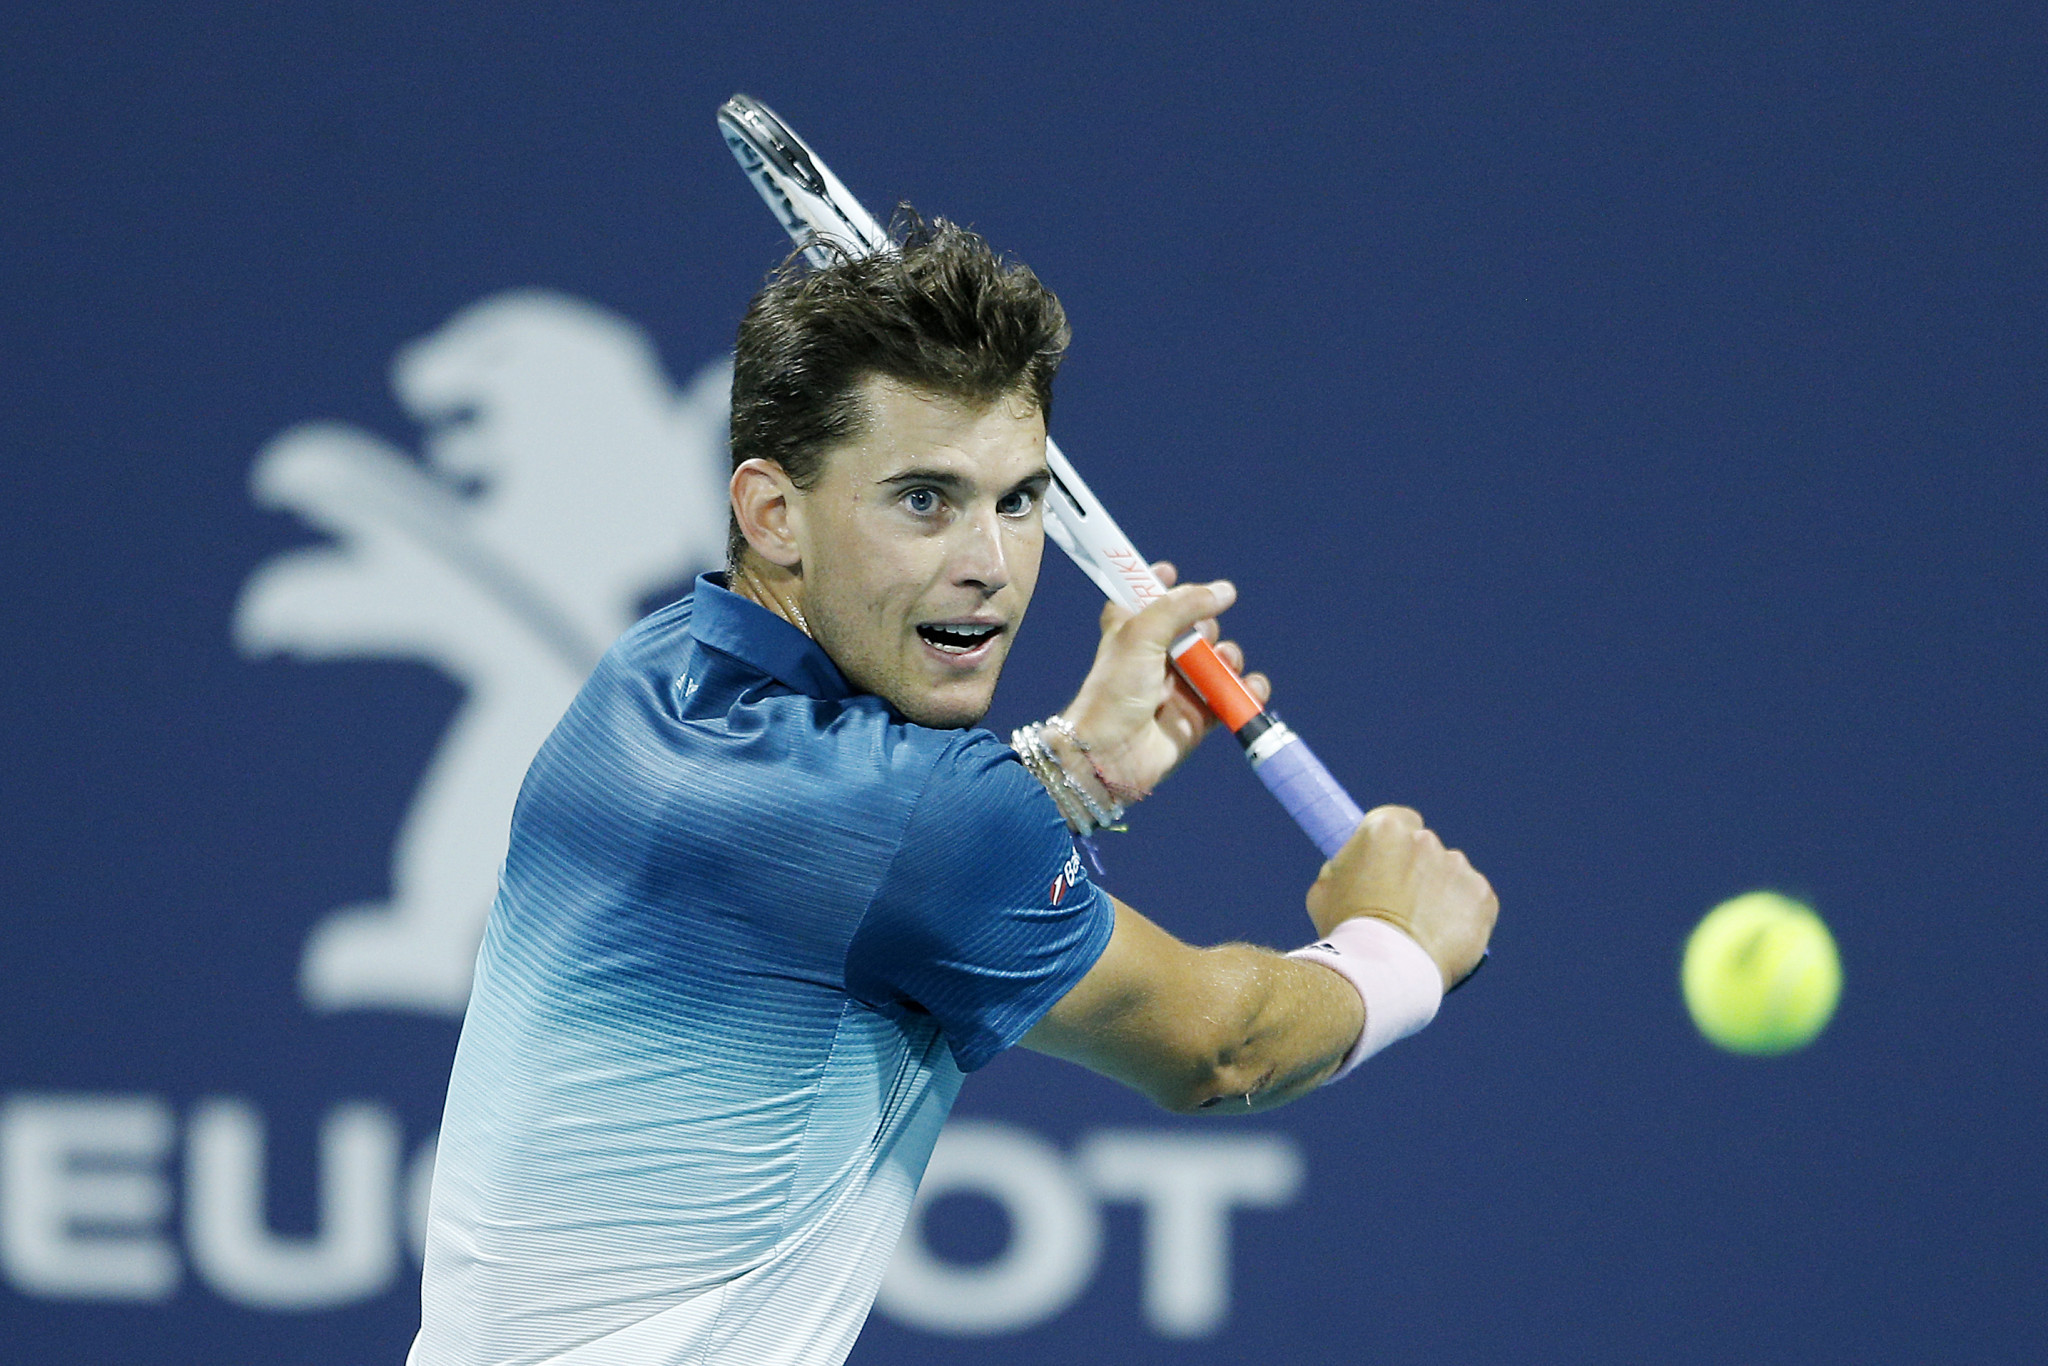 Indian Wells Masters winner Dominic Thiem was among the high-profile casualties in the men's event ©Getty Images